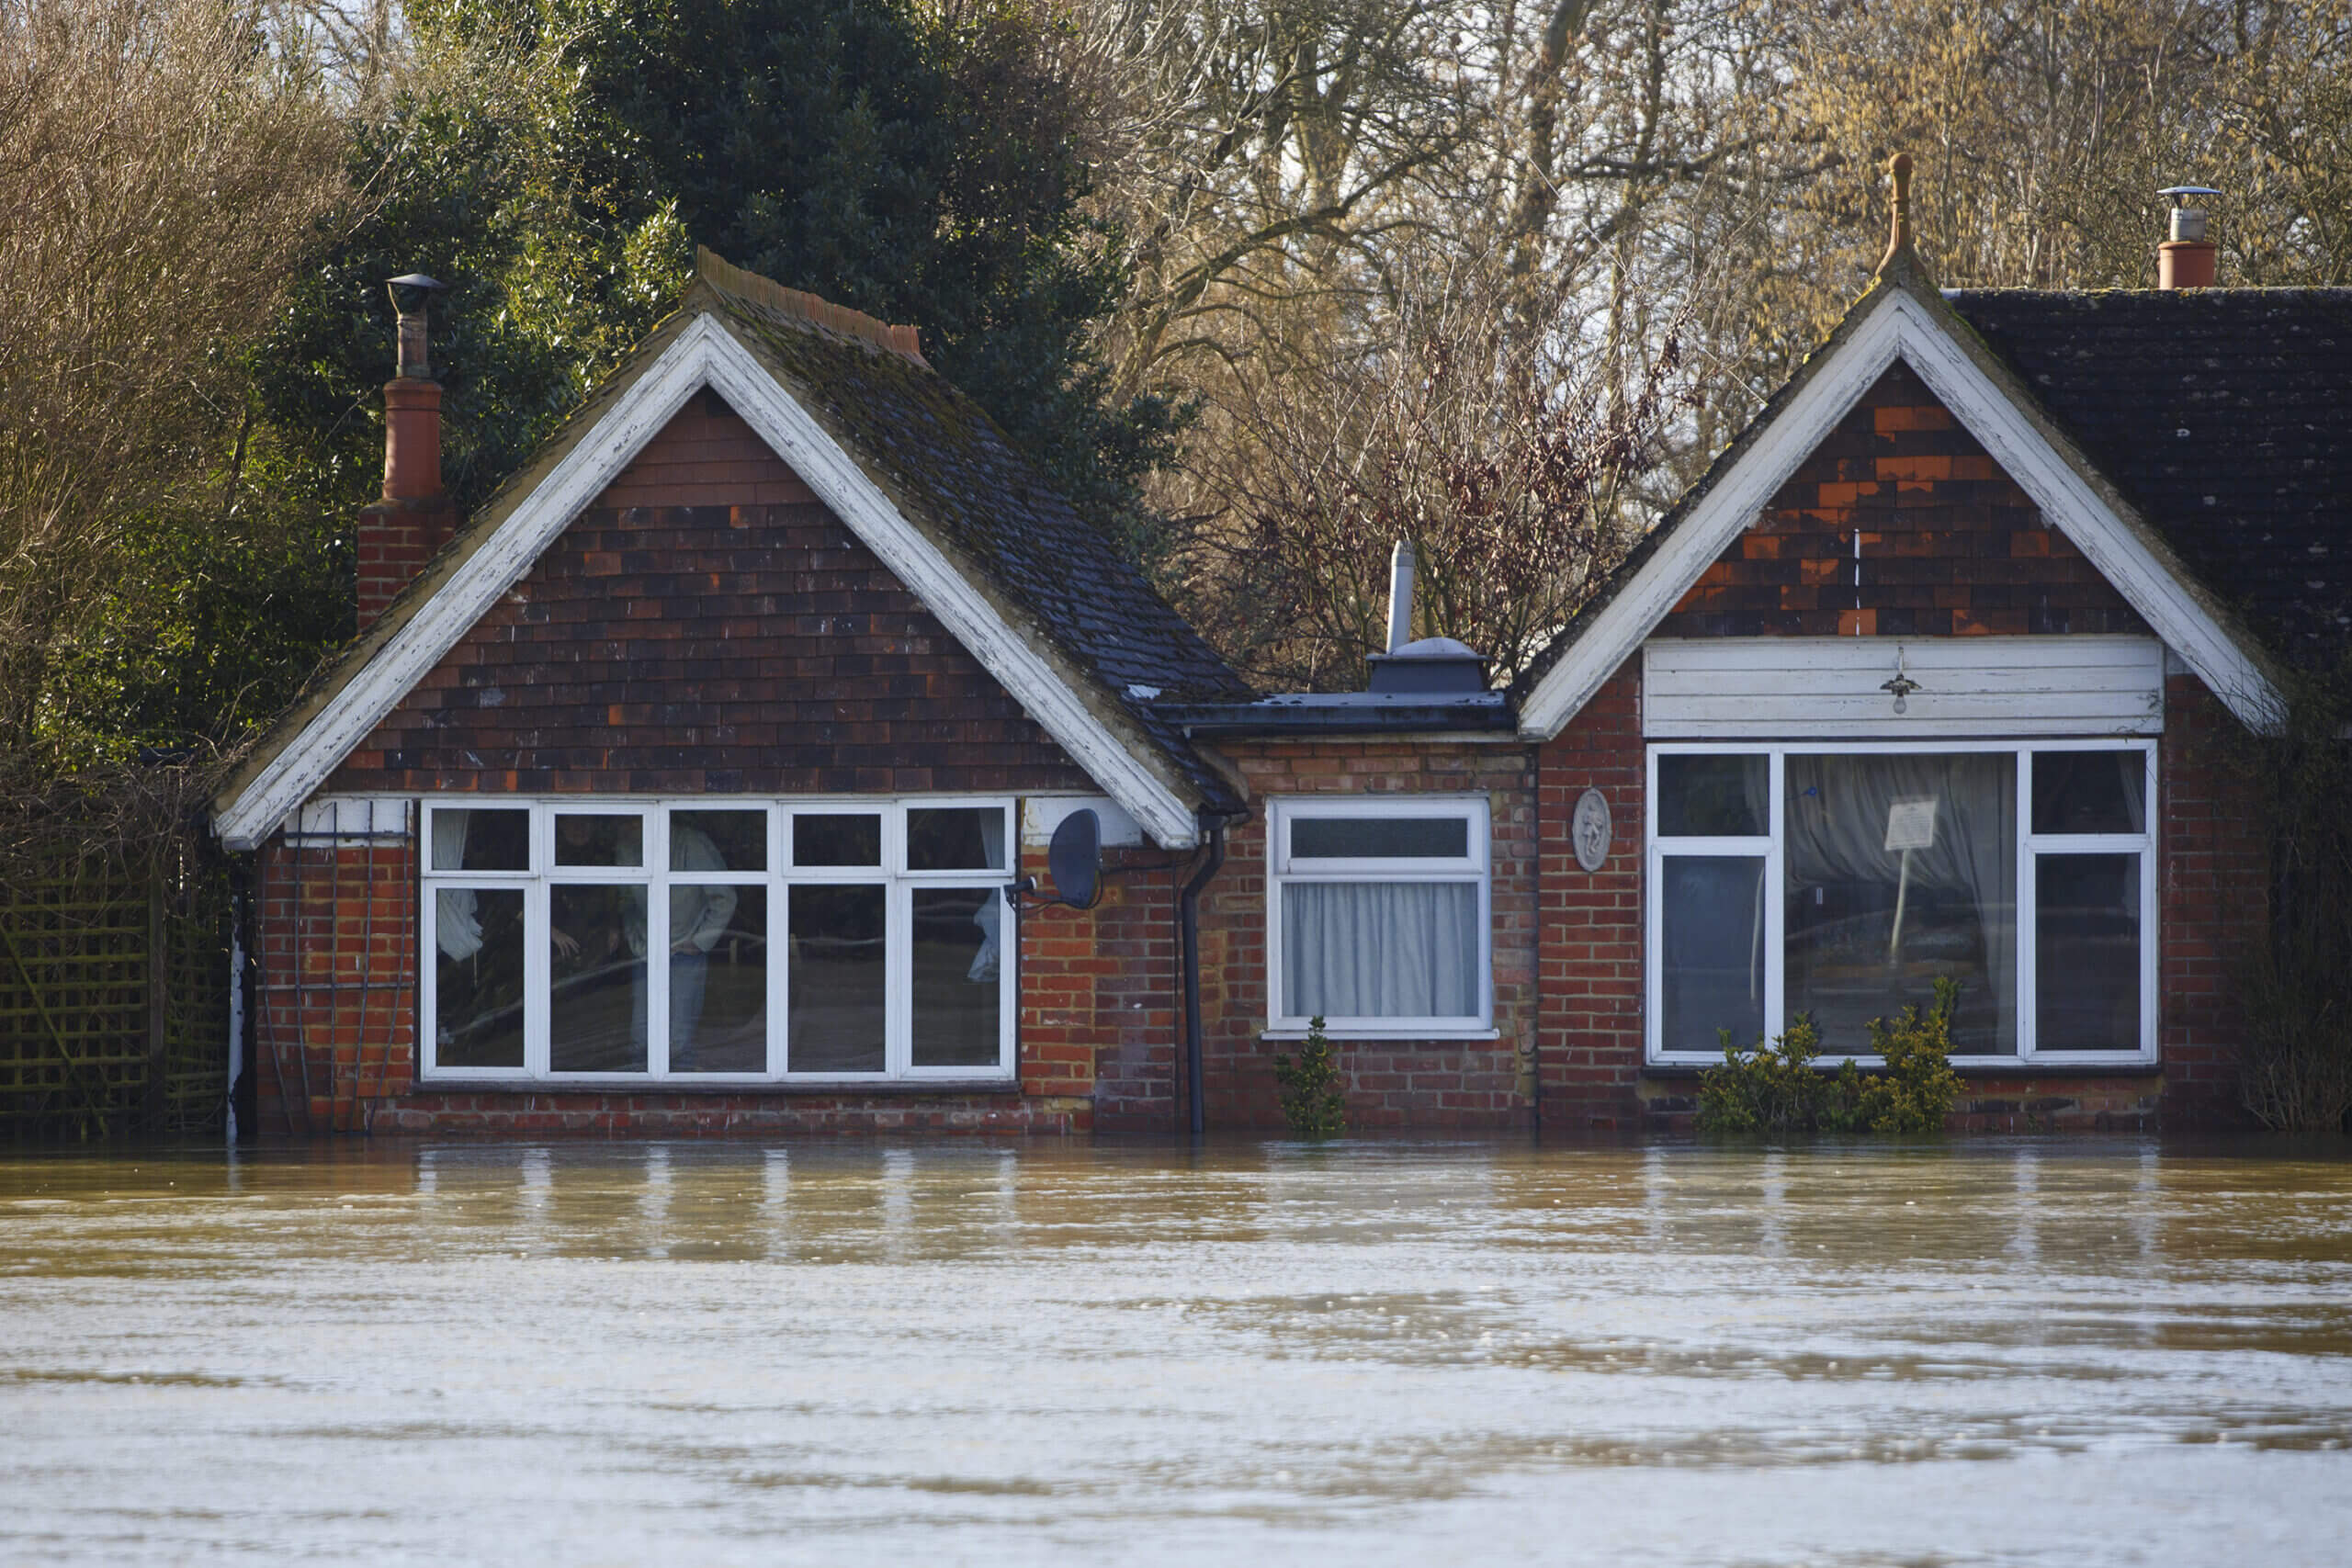 Floods will engulf London if we do not change our environmental policy (Warning)